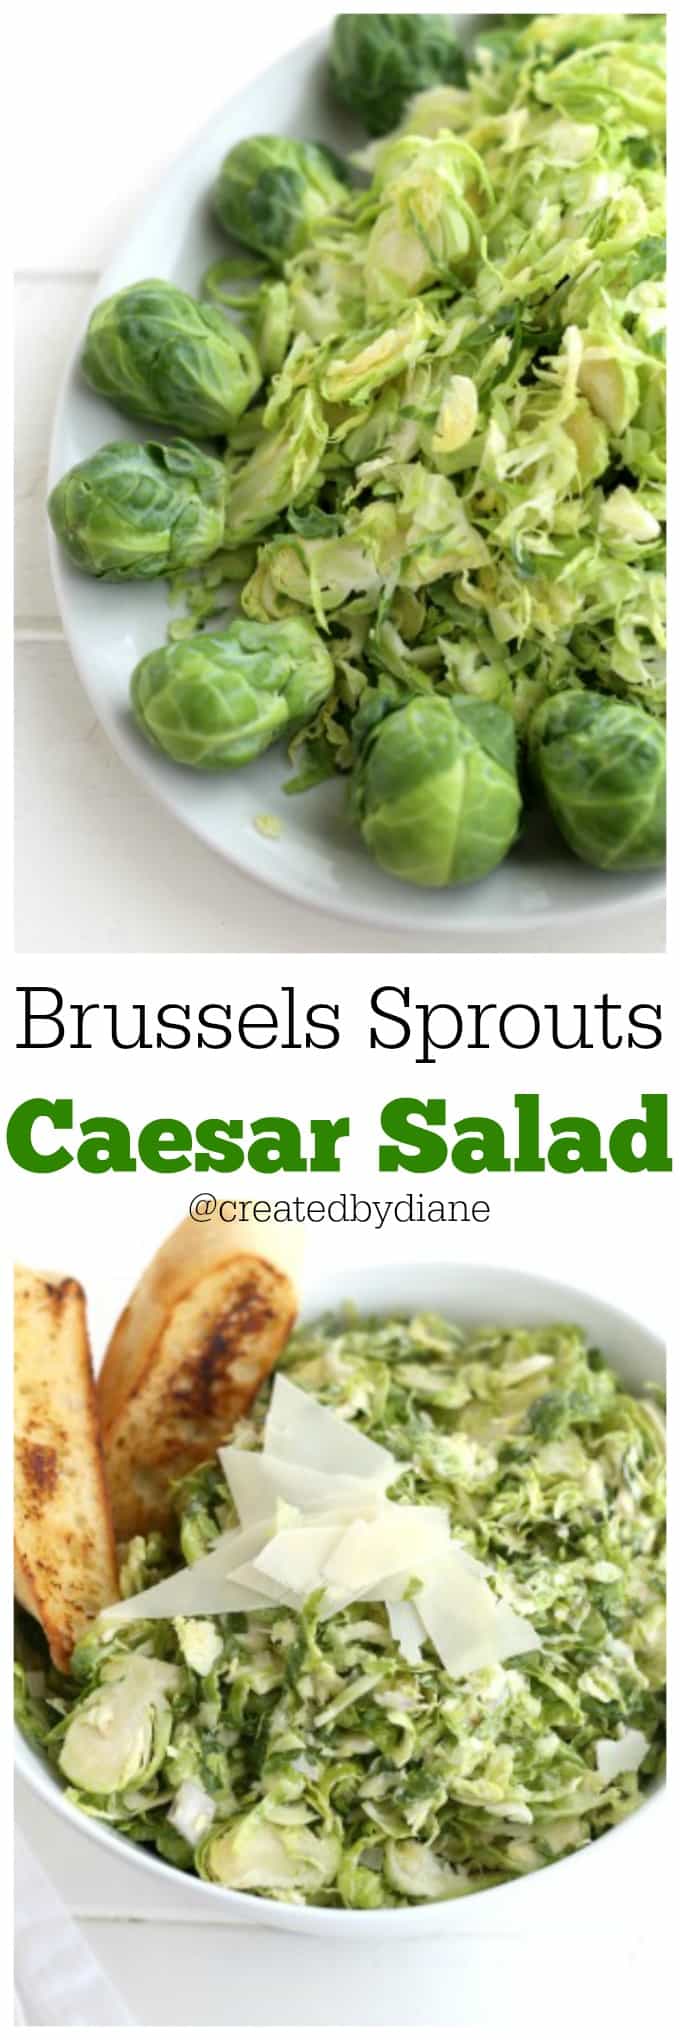 Brussels Sprouts Caesar Salad recipe from @createdbydiane